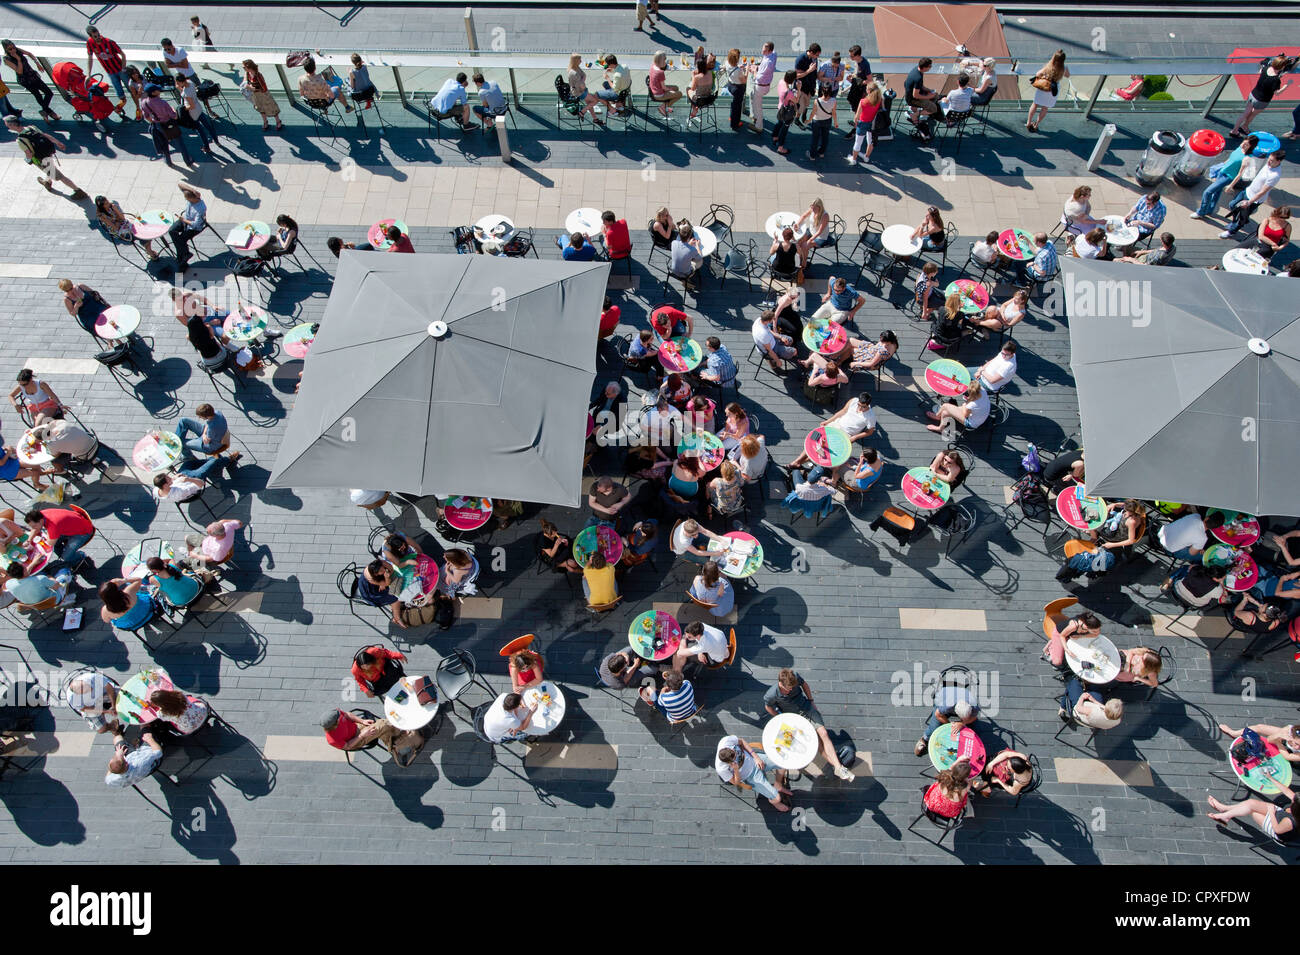 People enjoing hot summer day by Royal Festival Hall, Southbank, London, United Kingdom Stock Photo